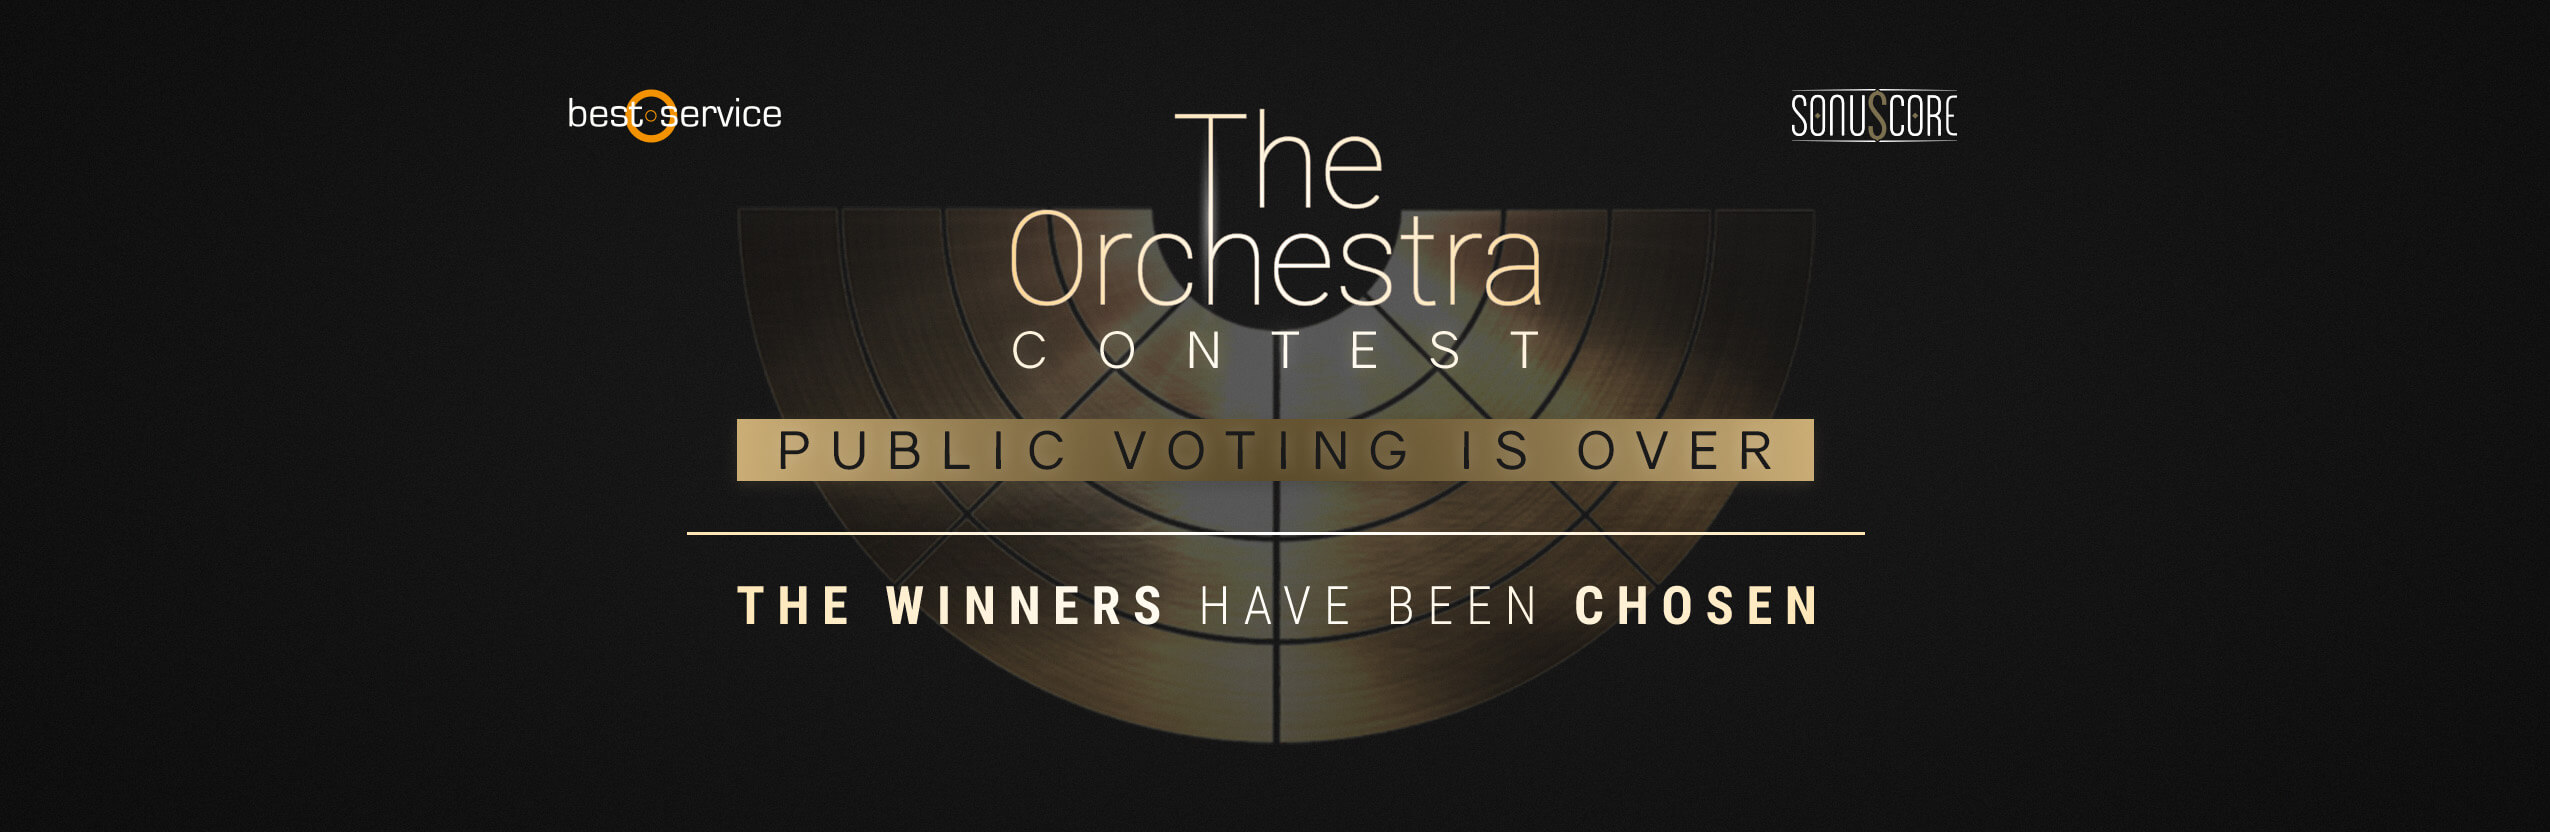 The Orchestra Contest Website Banner End